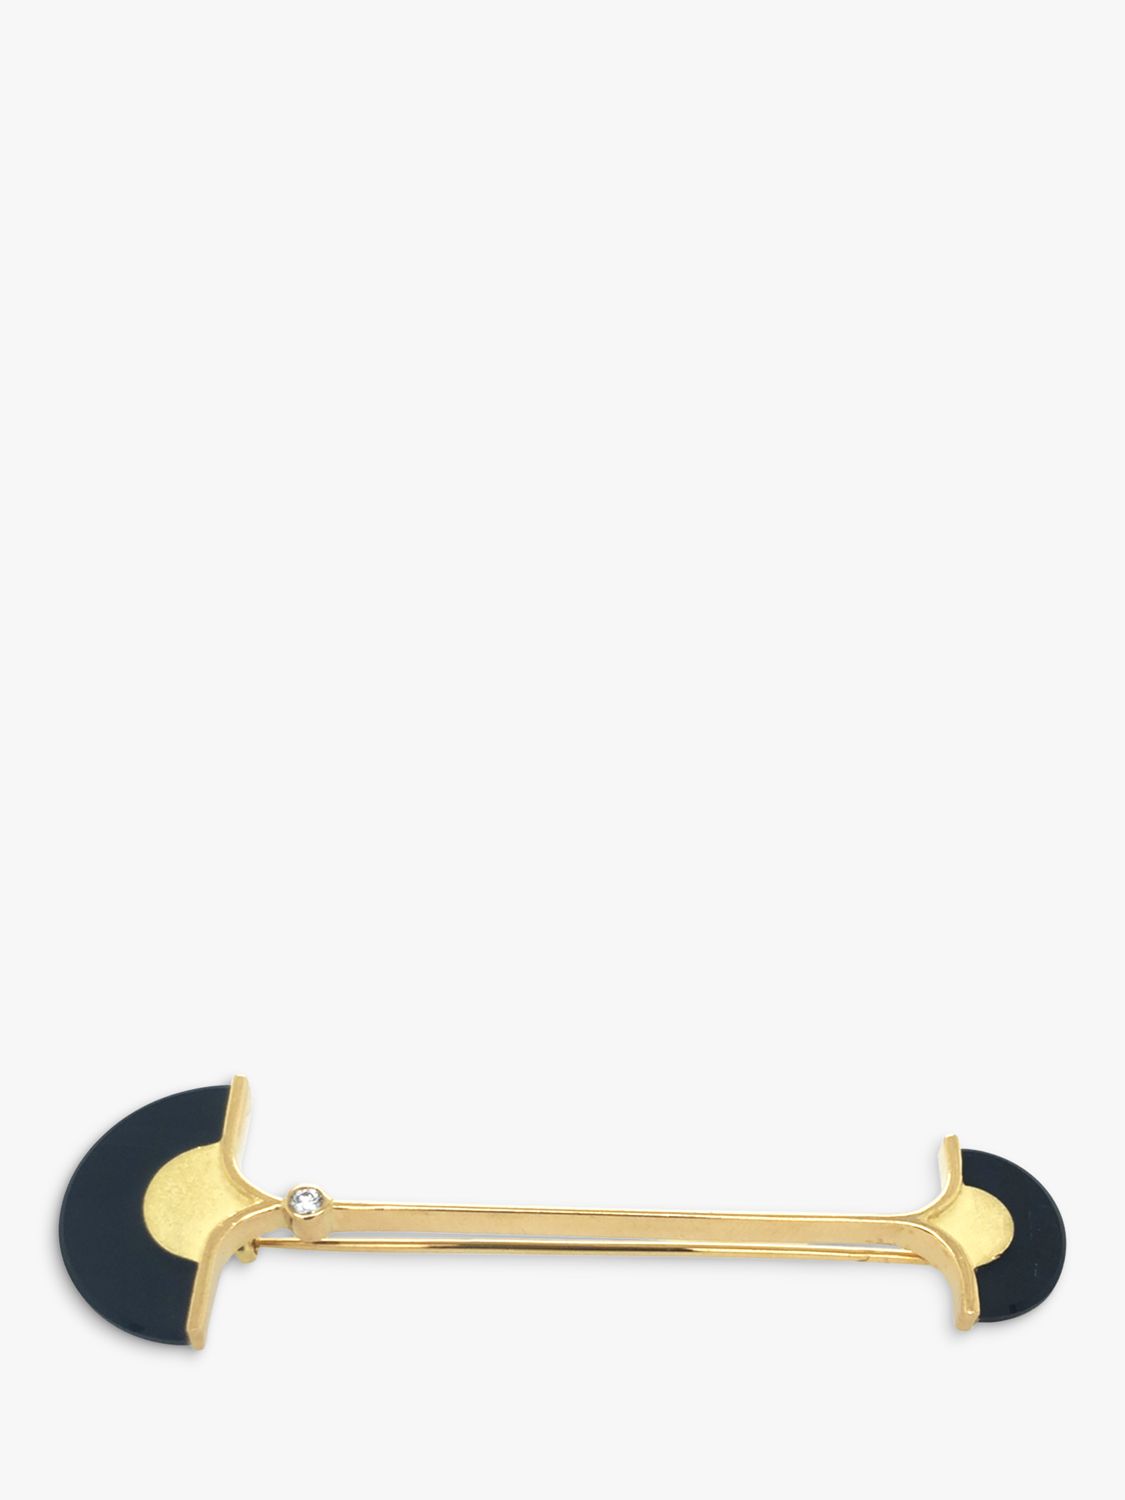 Buy Vintage Fine Jewellery Second Hand 18ct Gold Onyx and Diamond Bar Brooch, Dated Sheffield 1987 Online at johnlewis.com